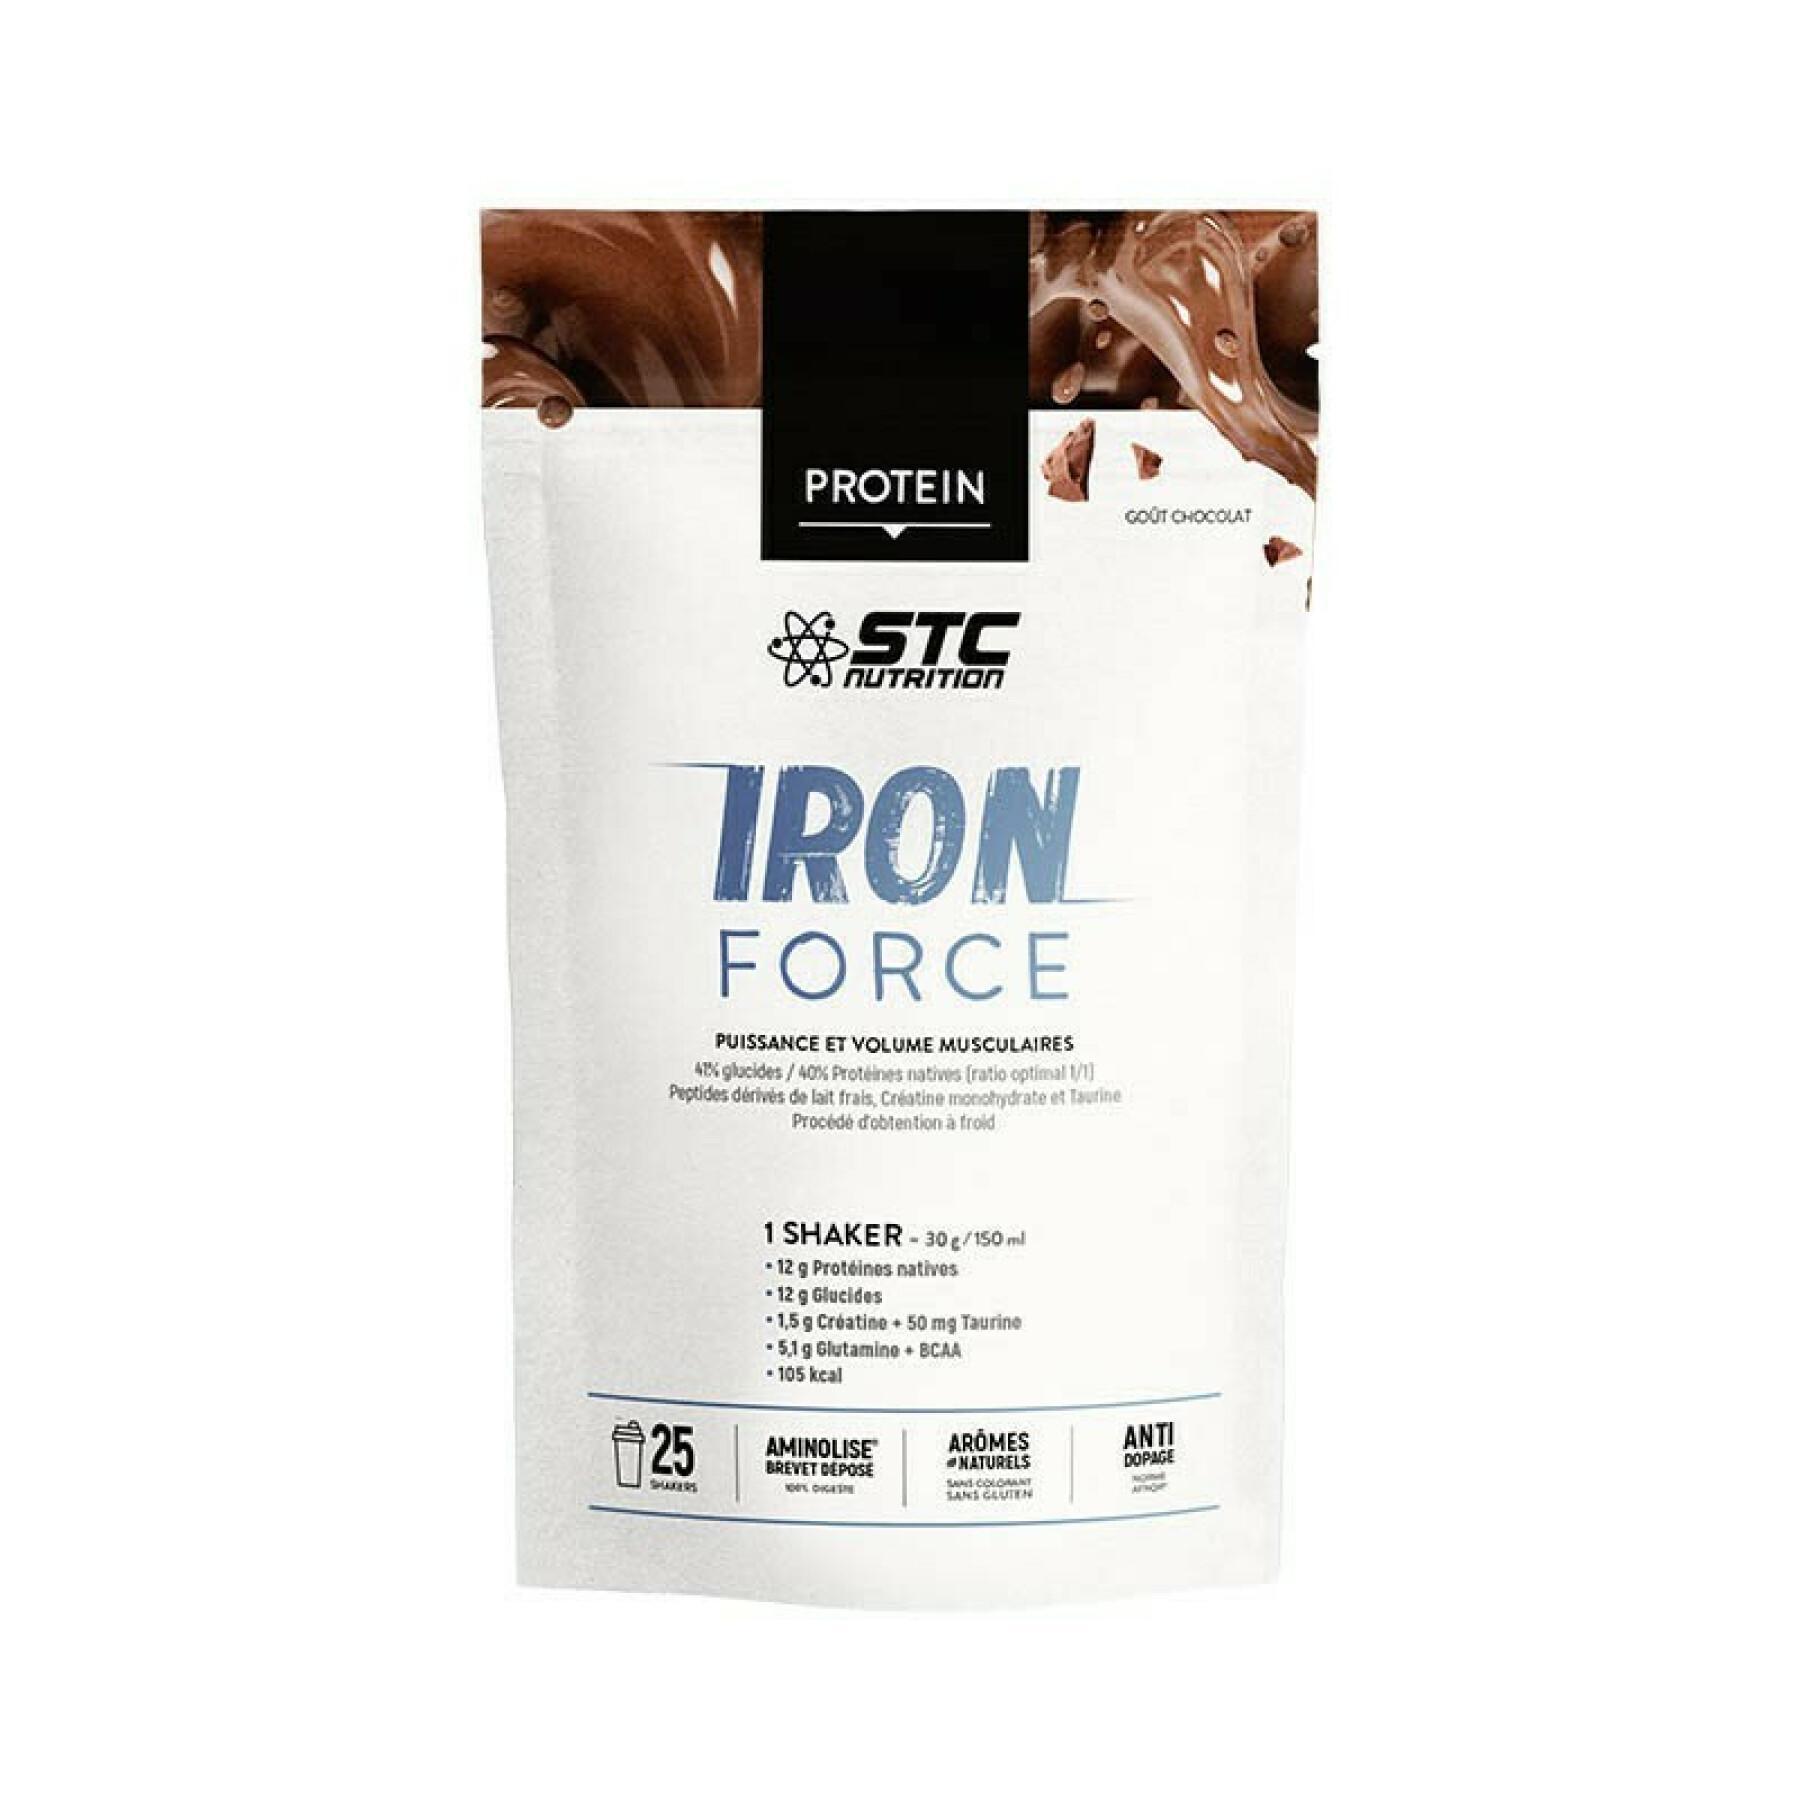 Doypack iron force® protein med måttsked STC Nutrition chocolat - 750g